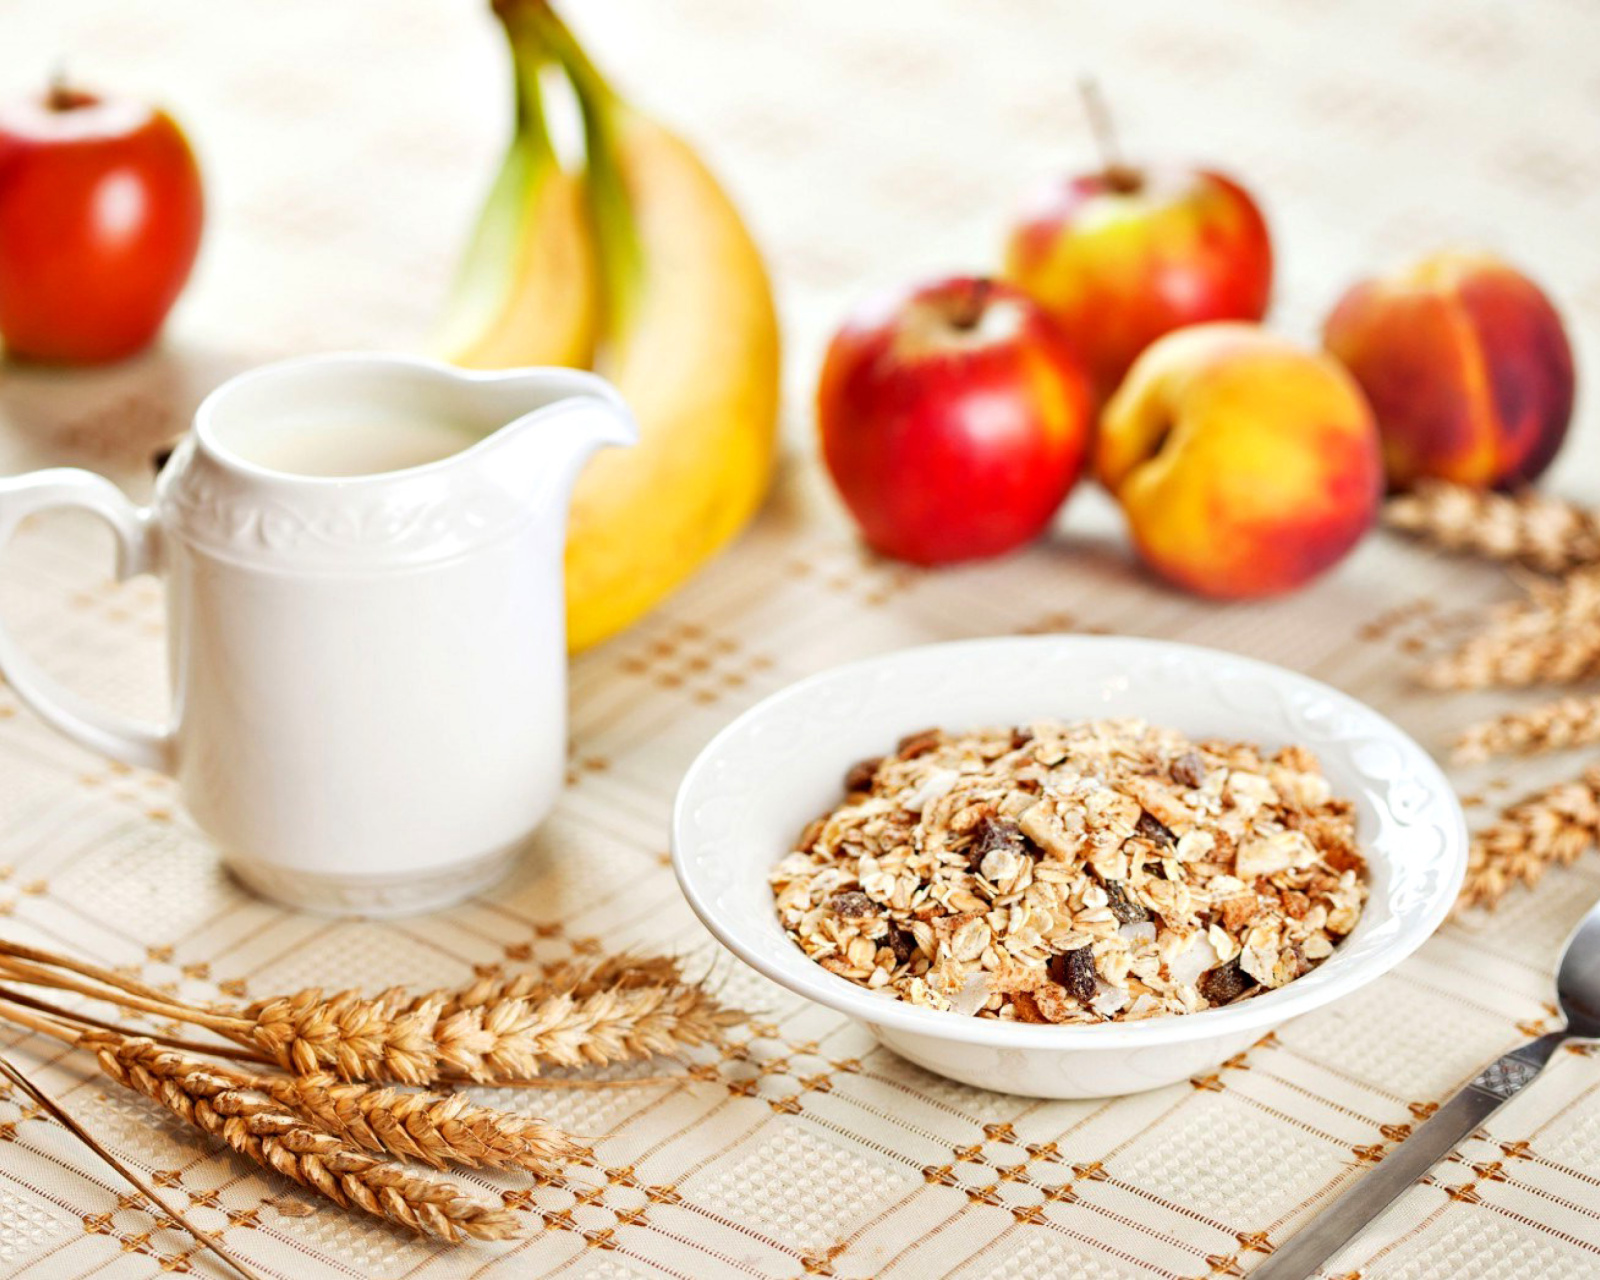 Breakfast with bananas and oatmeal wallpaper 1600x1280